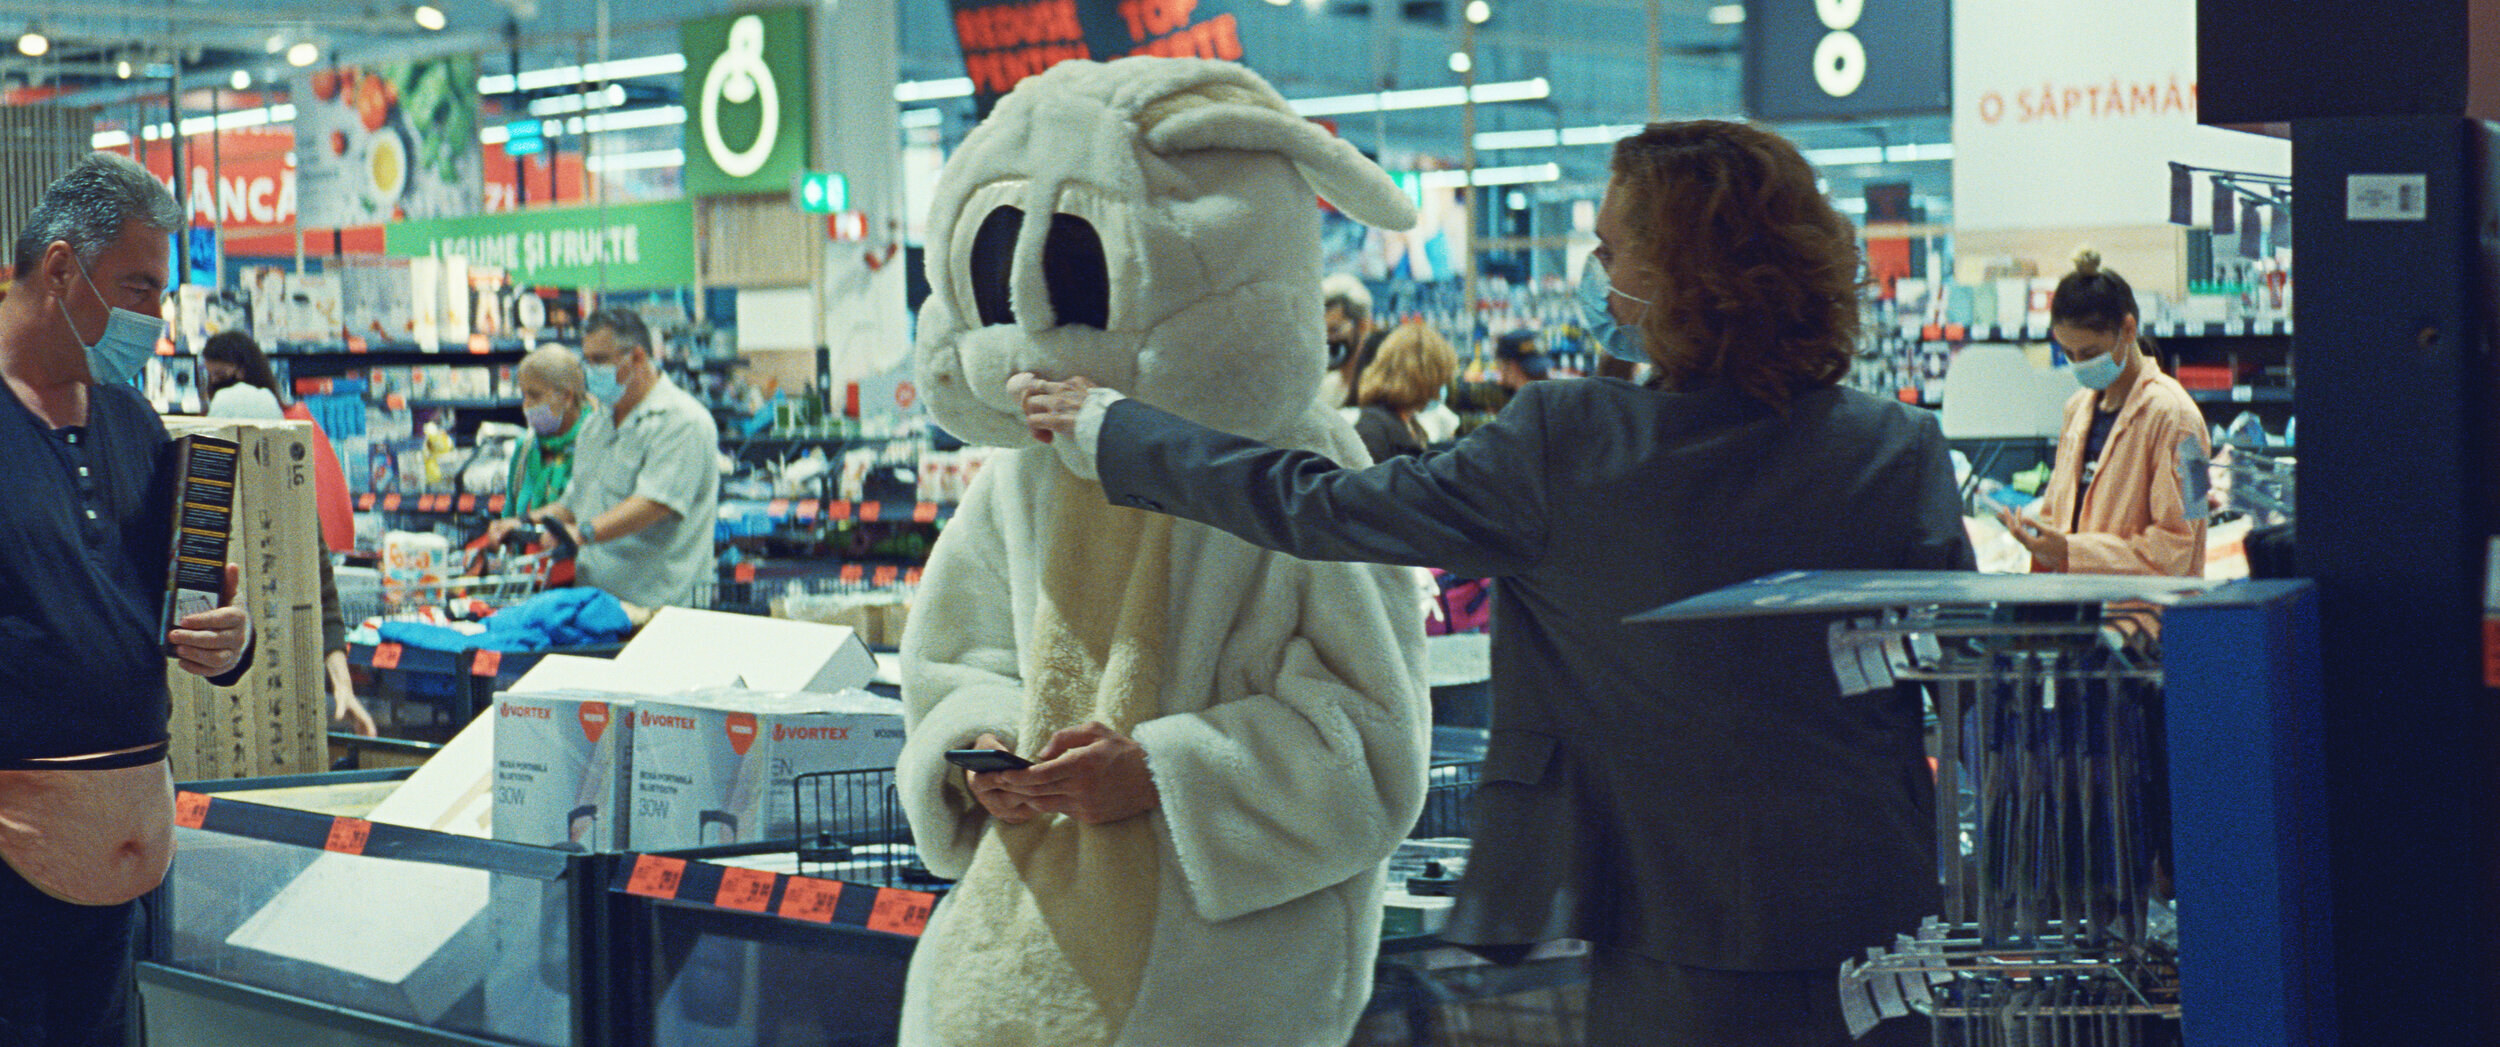 Someone in a rabbit costume at a supermarket